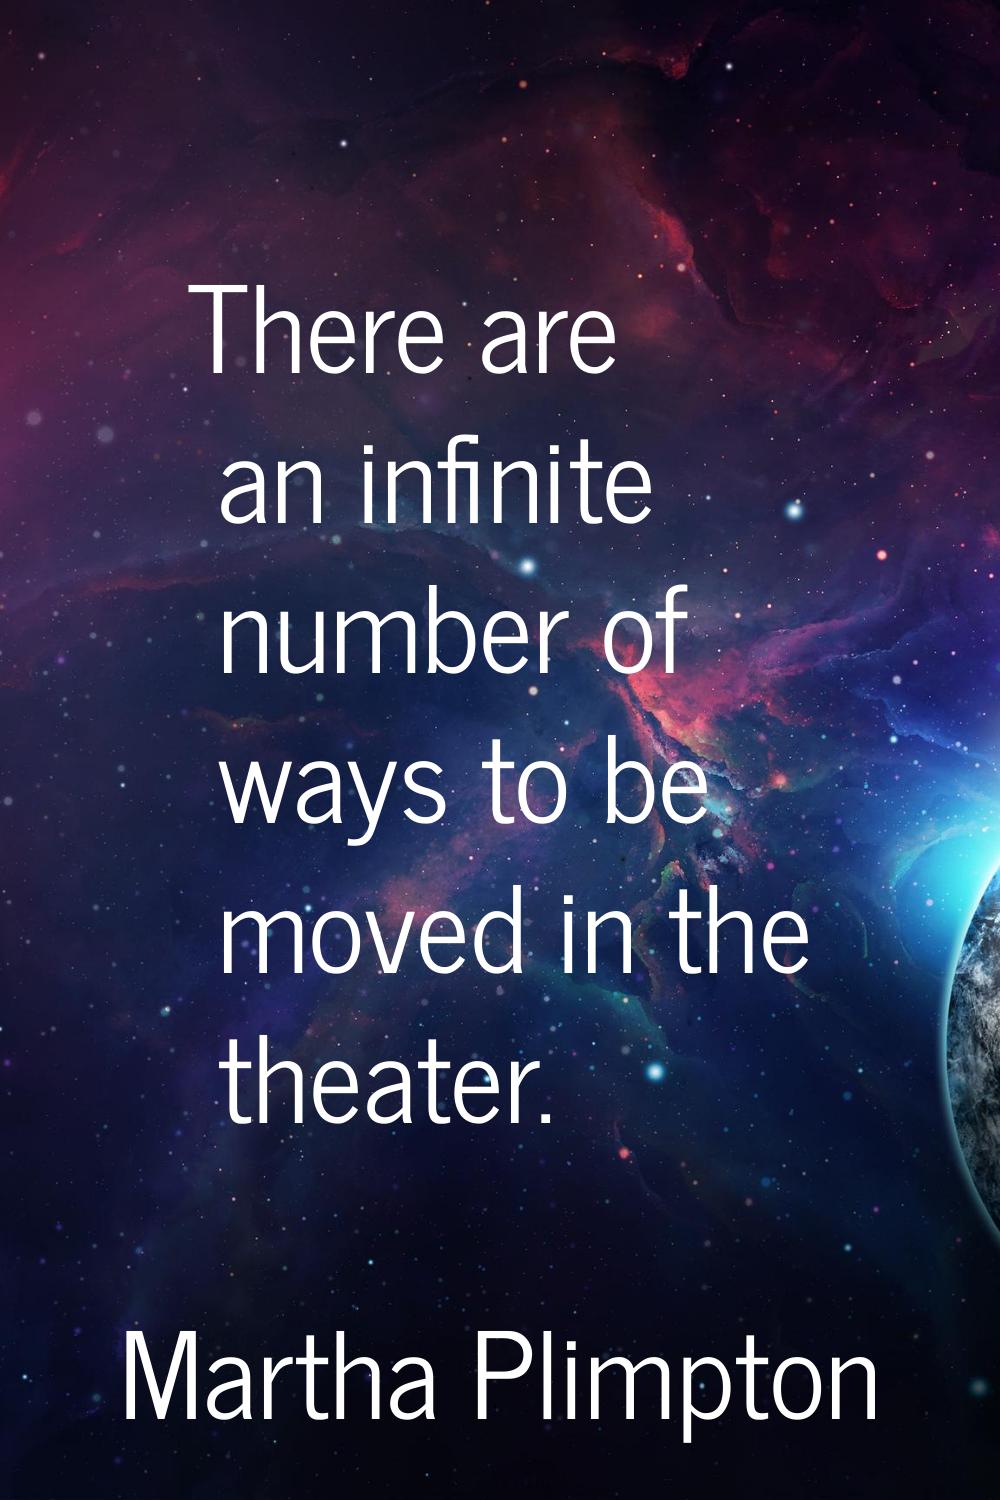 There are an infinite number of ways to be moved in the theater.